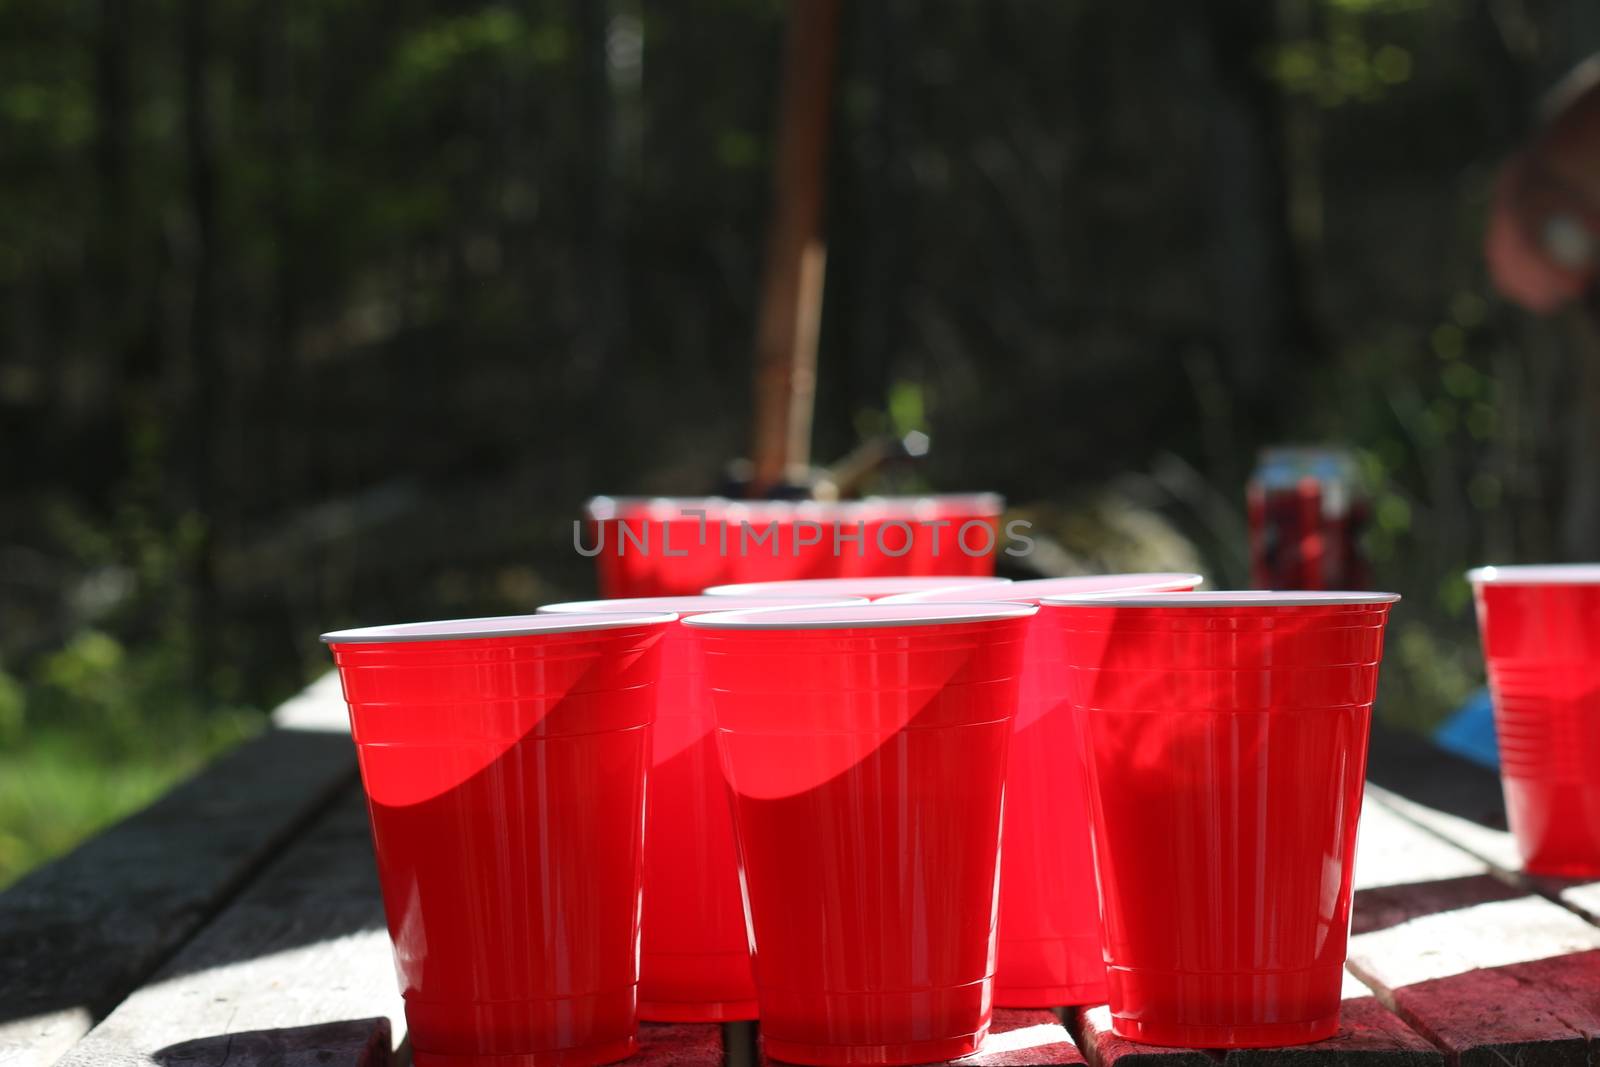 beer pong cups set up outside on picnic table. High quality photo